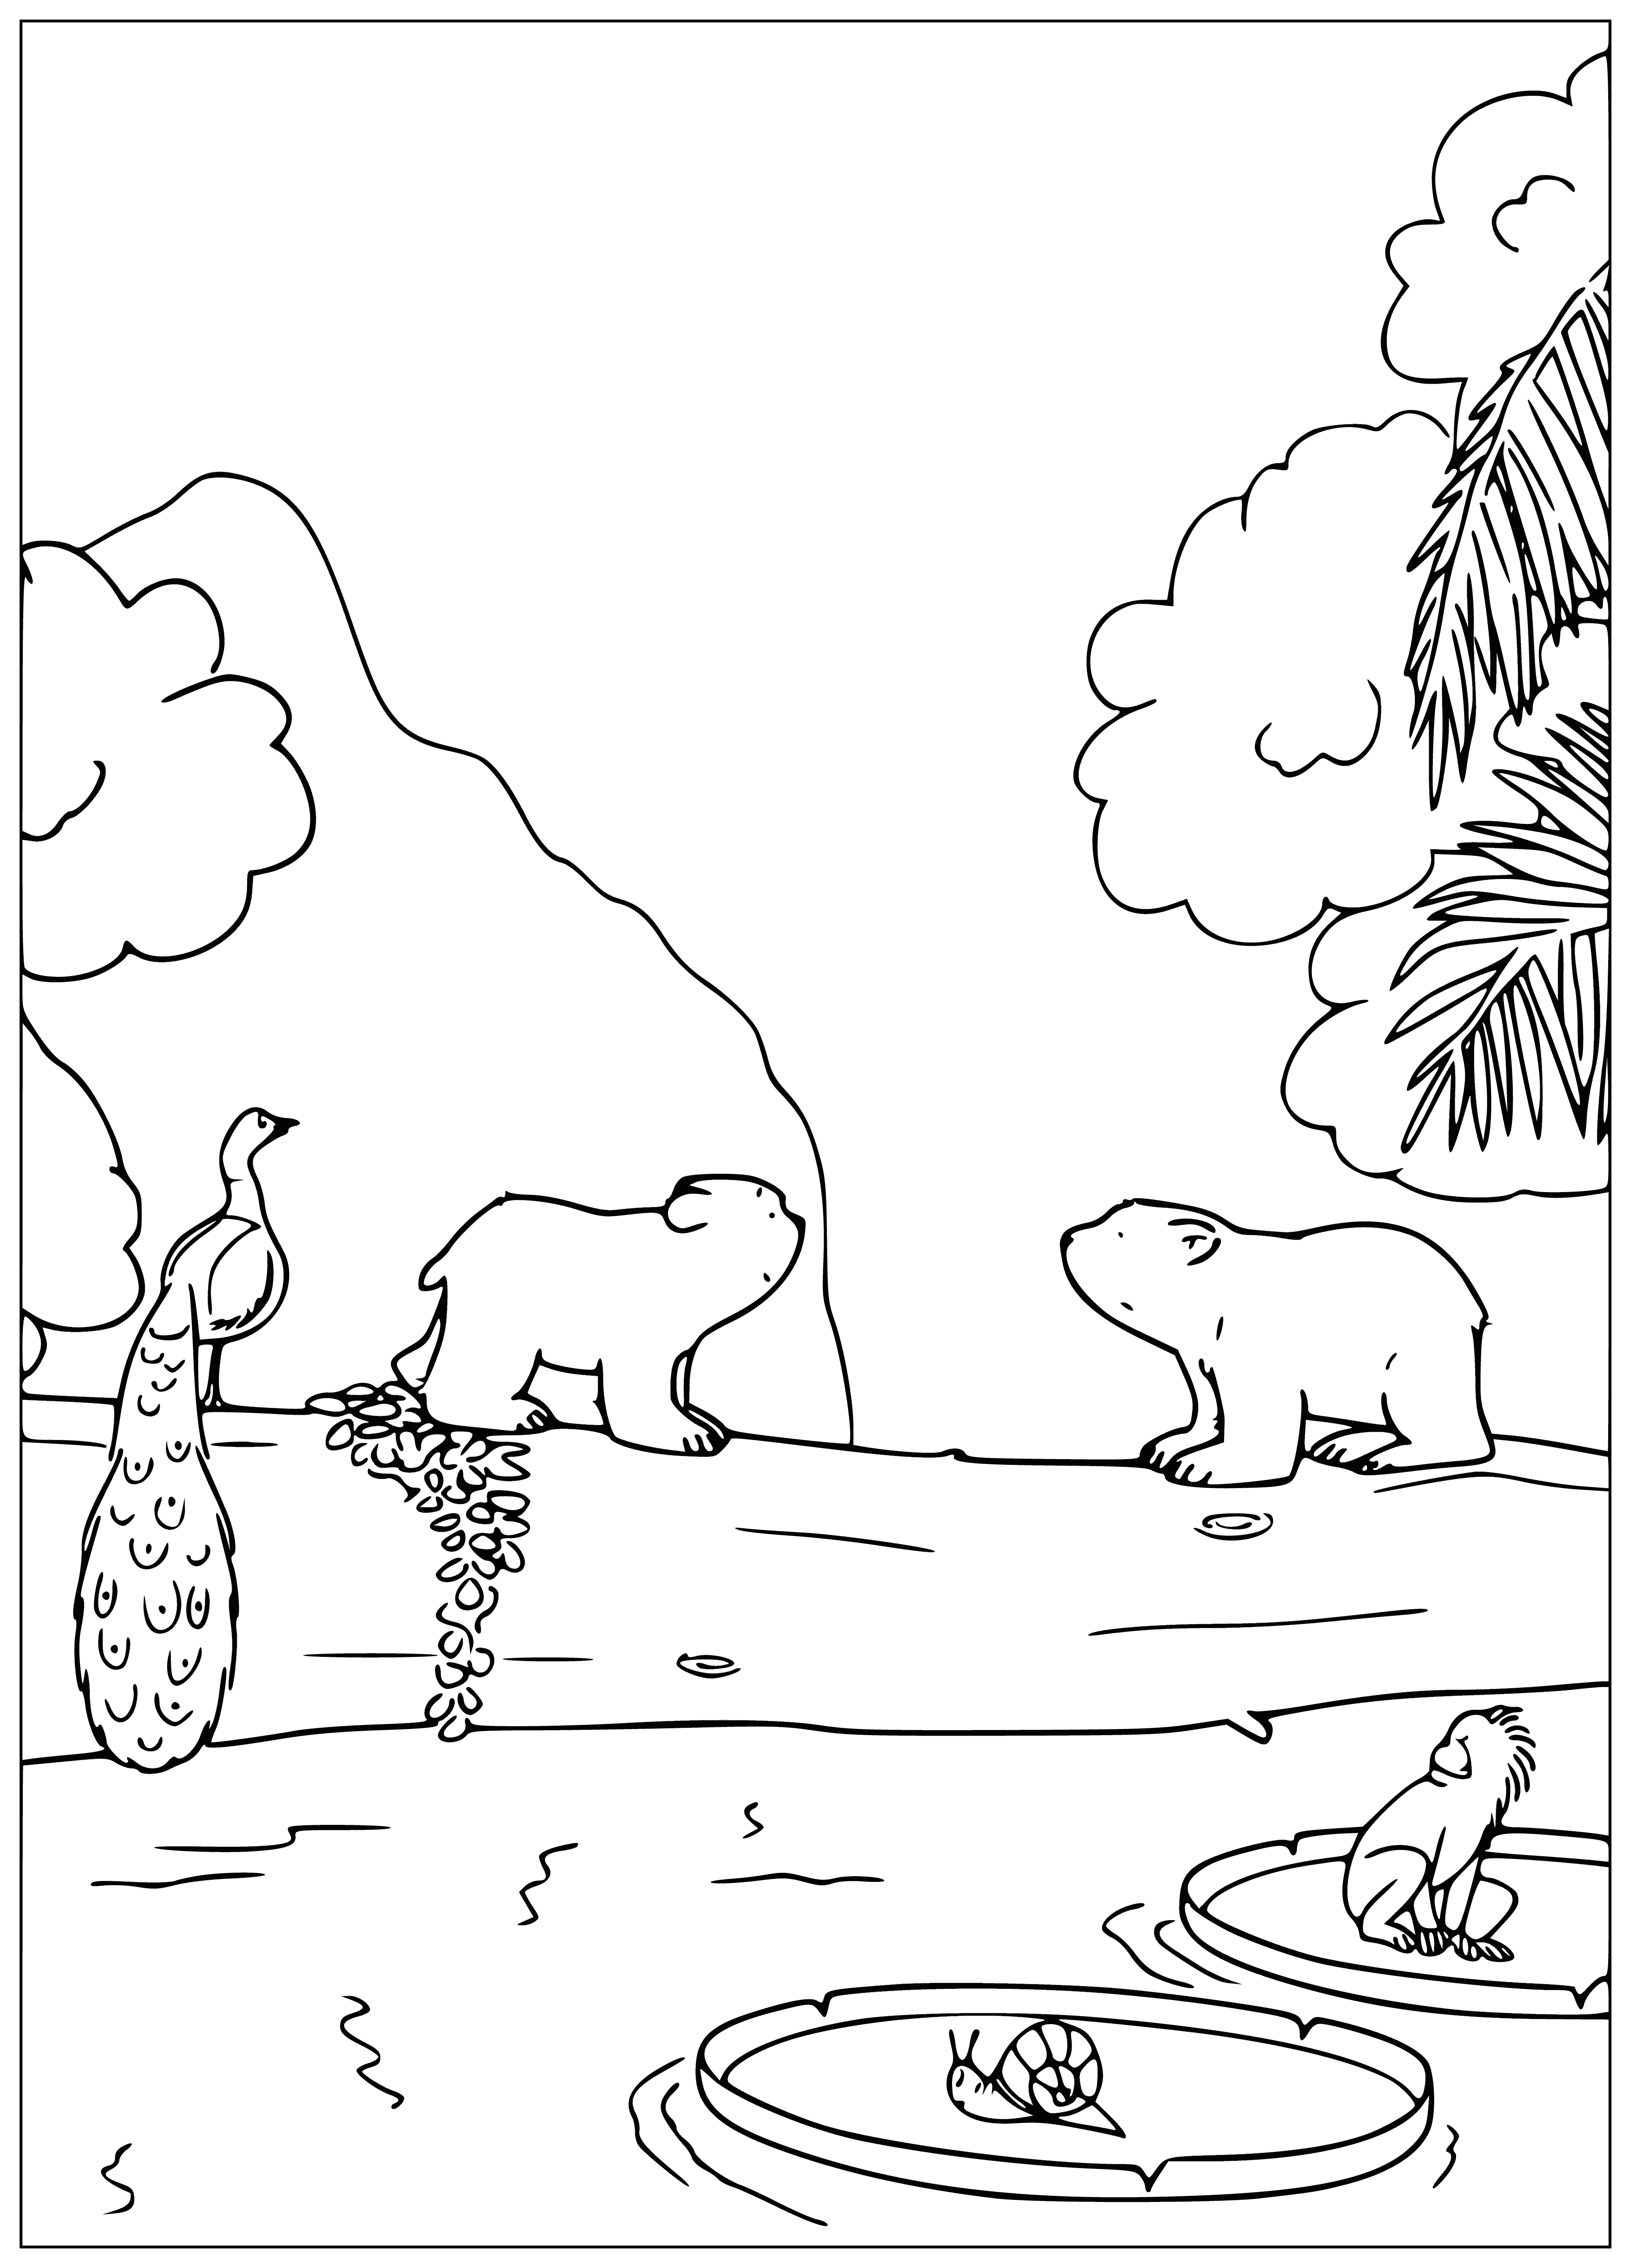 coloring page: Little polar bear sits on log in snow, looking into the distance.